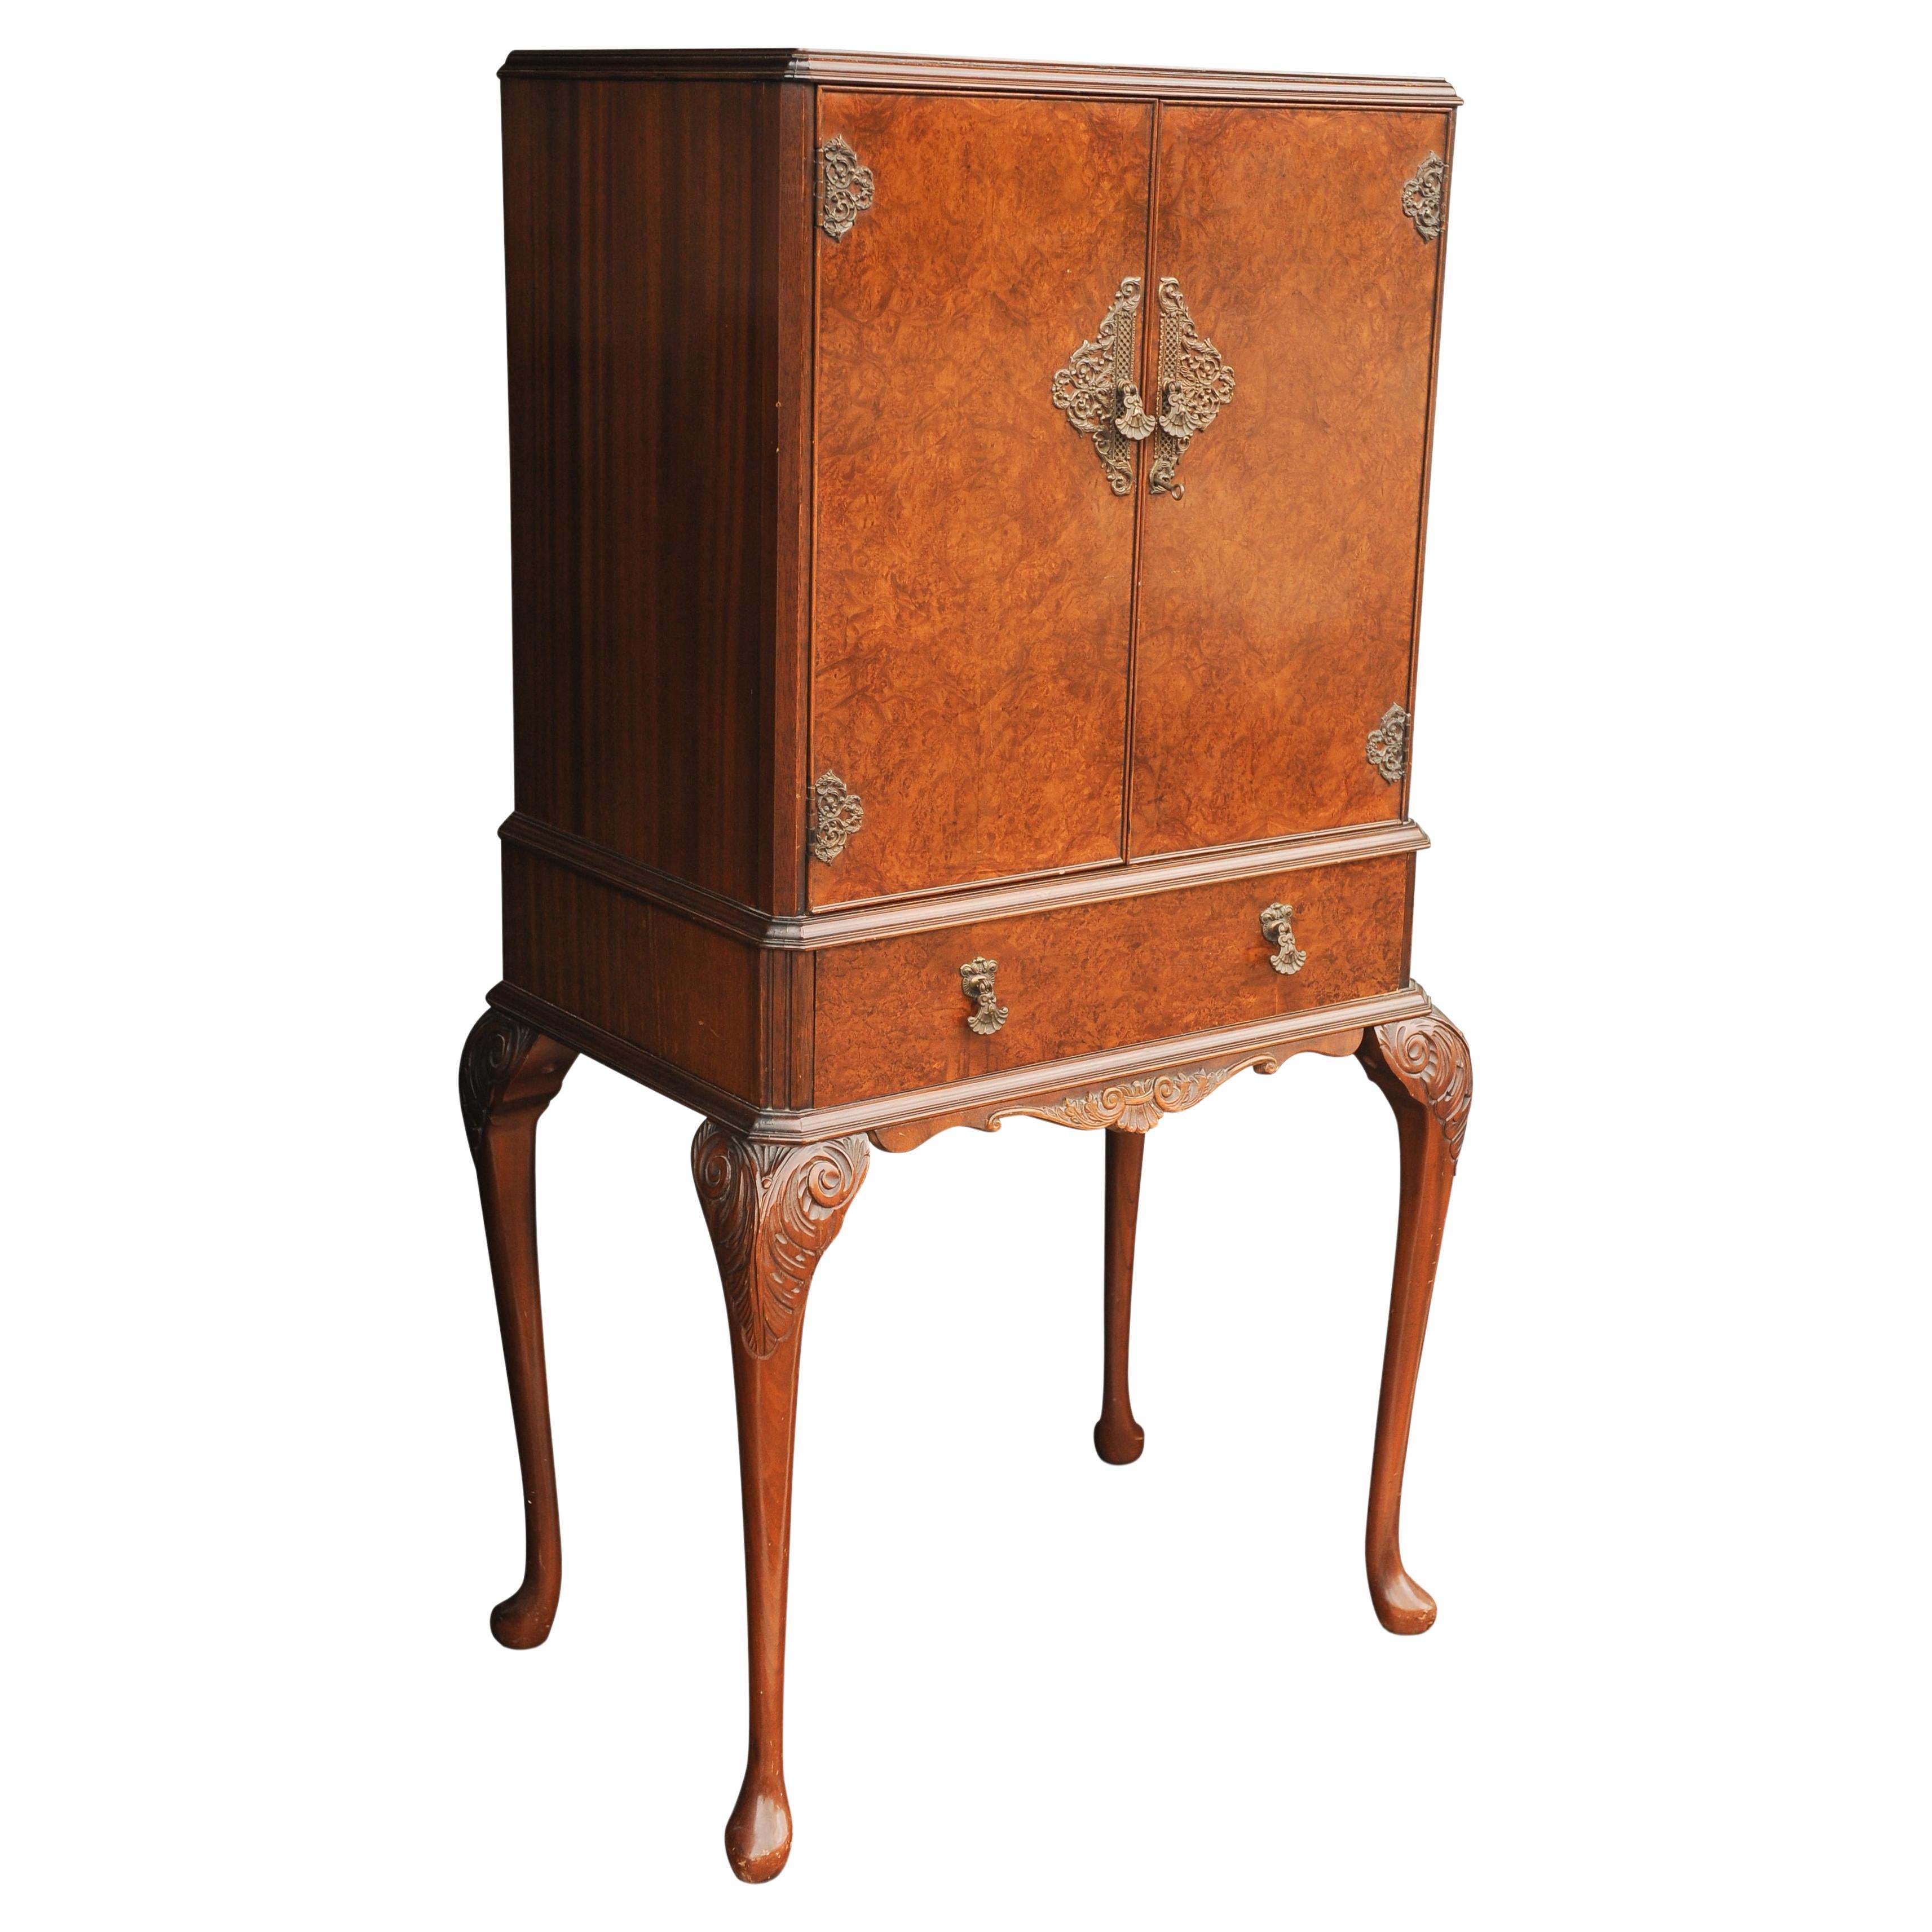 1930s Art Deco Decadent Epstein Cocktail Cabinet Hand Crafted Burr Walnut With Ormolu Carvings

A beautiful cocktail cabinet fit for entertaining guests.
Fitted with interior mirror with lights lighted interior, and a pull out drinks shelf for